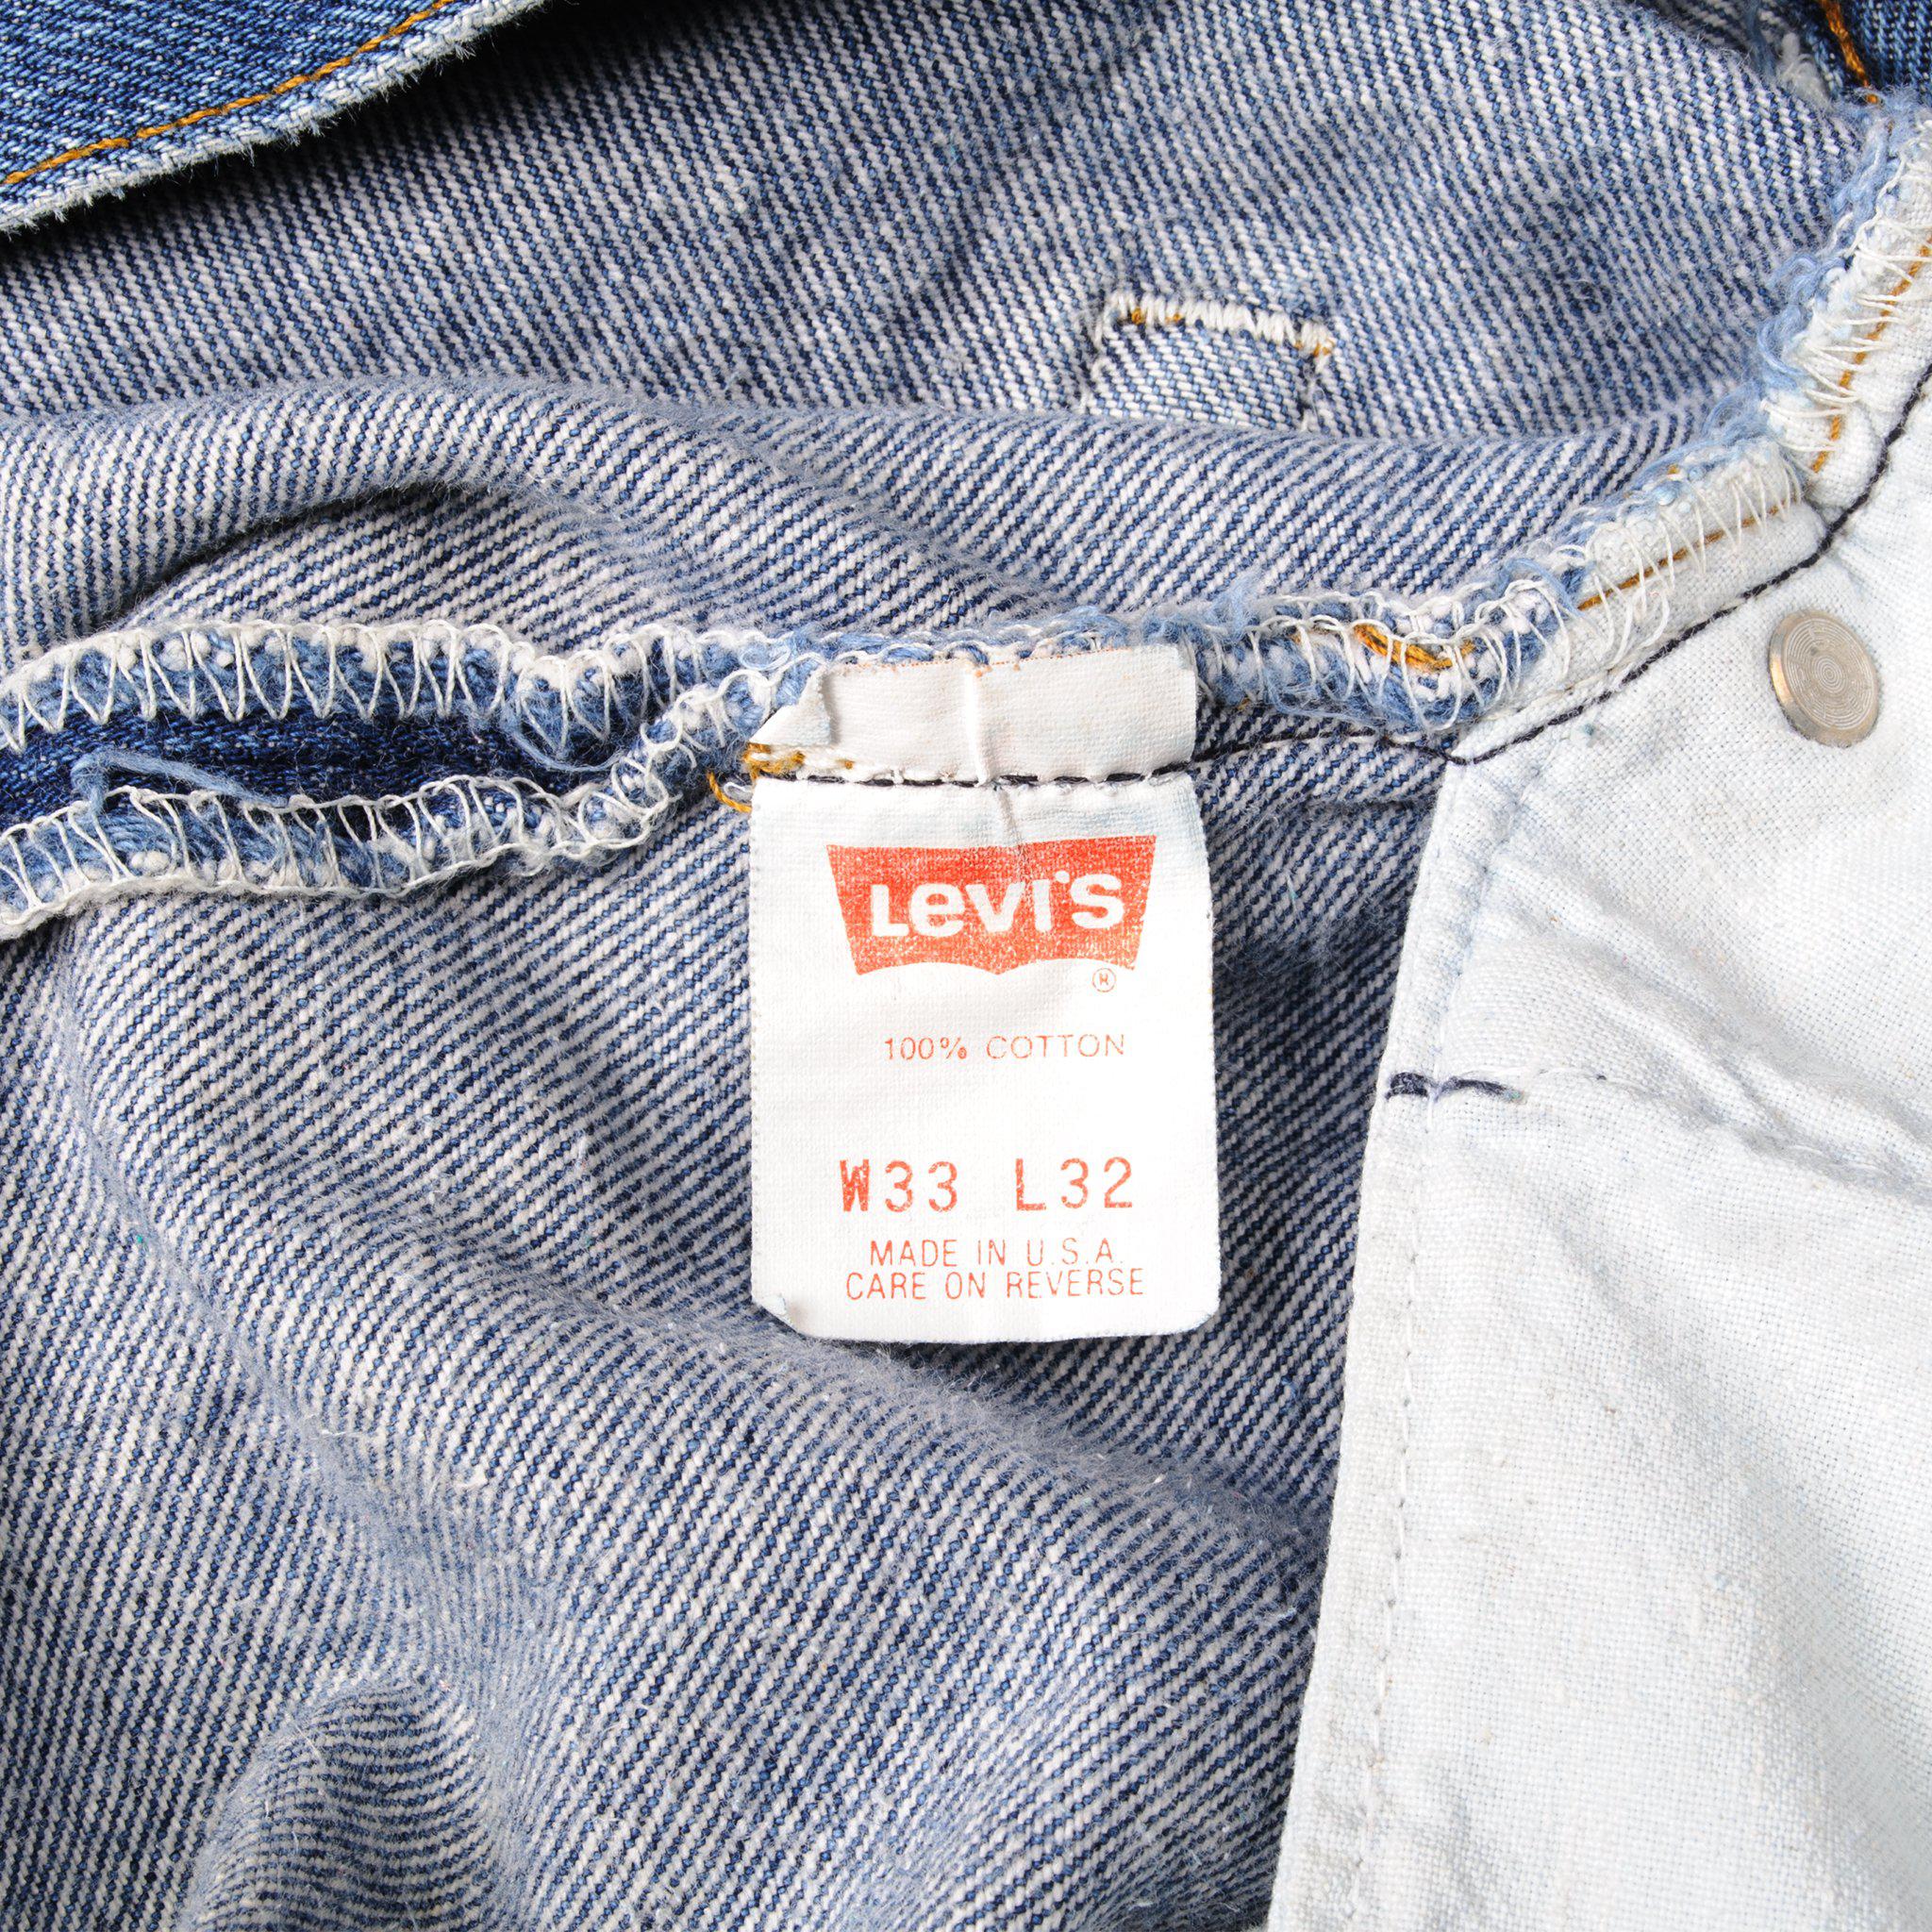 VINTAGE LEVIS 501 JEANS 1988-1993 INDIGO SIZE W32 L31 MADE IN USA 